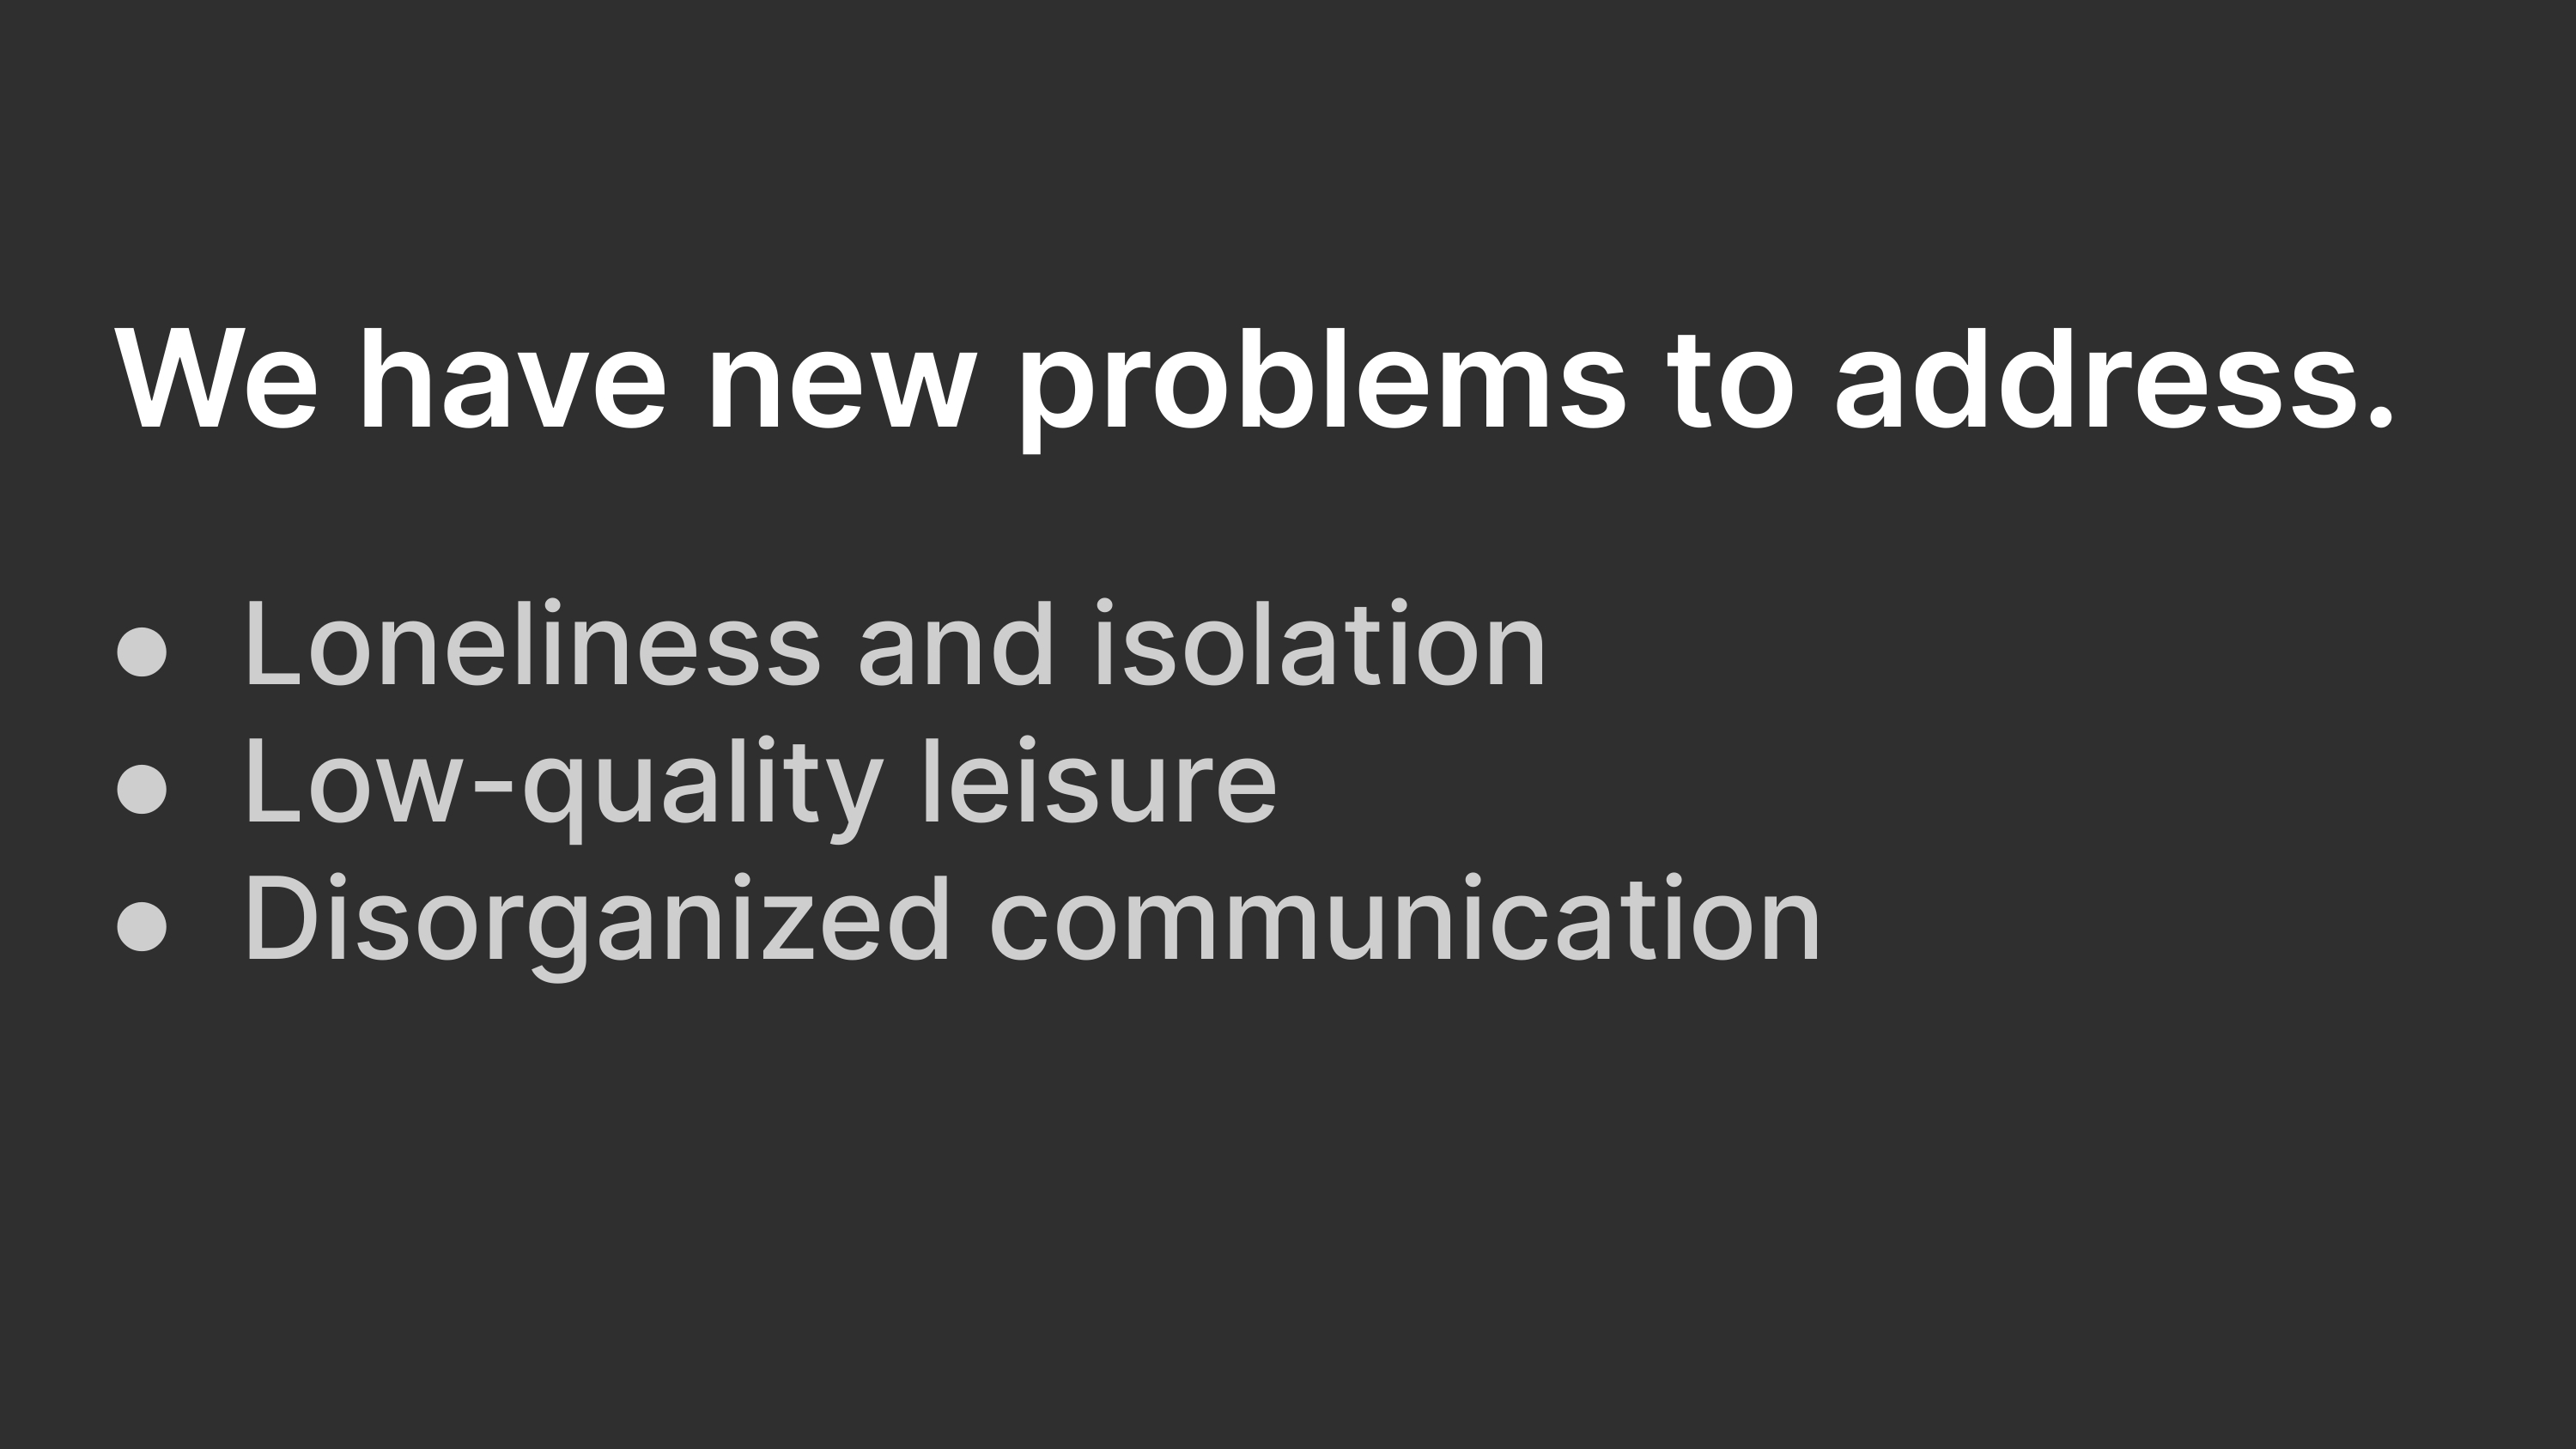 We have new problems to address: Loneliness and isolation; Low-quality leisure; Disorganized communication